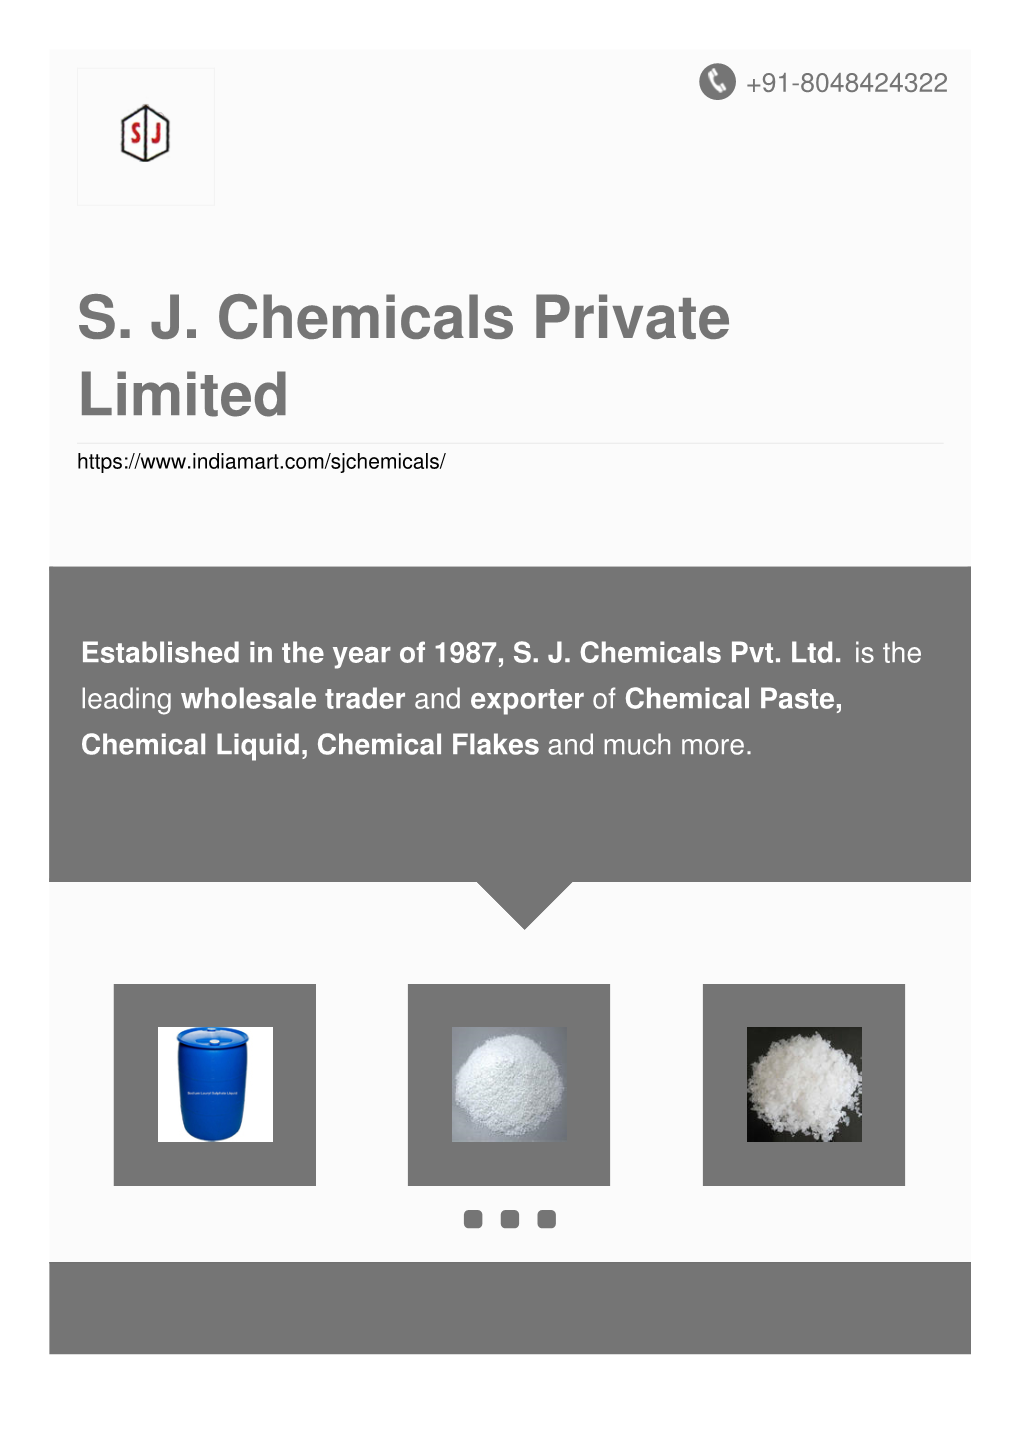 S. J. Chemicals Private Limited